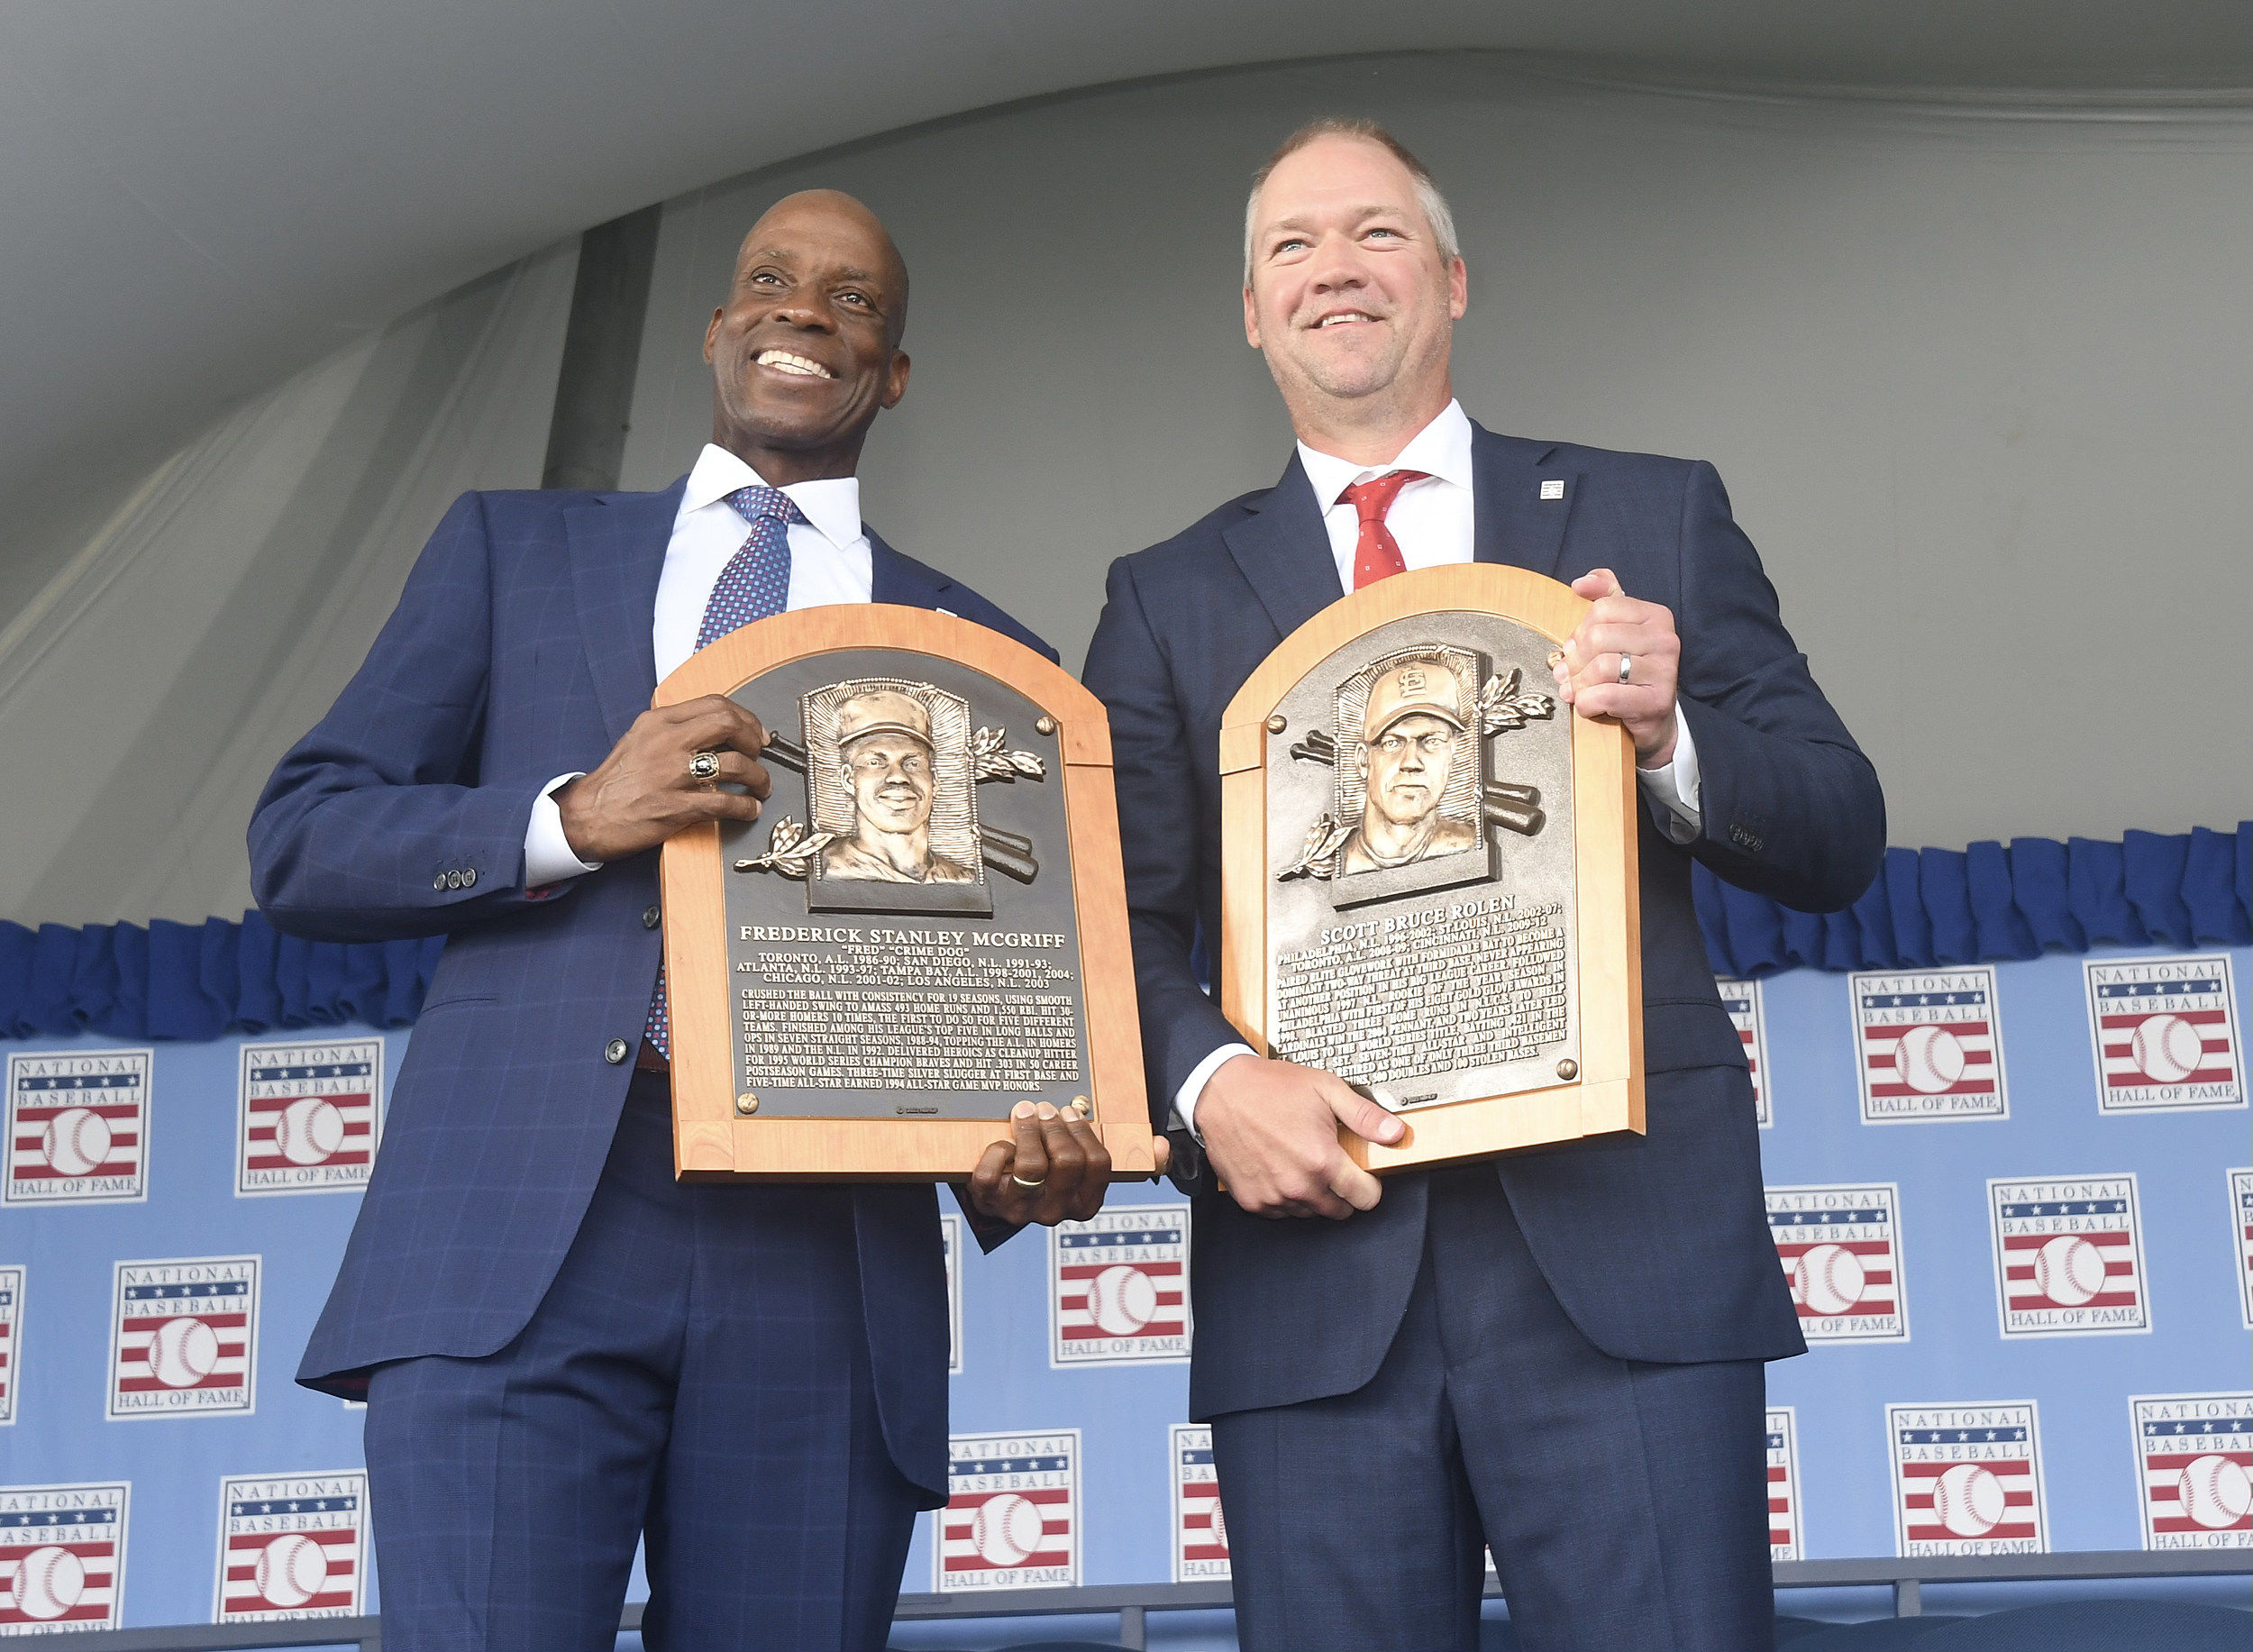 Rolen, McGriff inducted into Baseball Hall of Fame